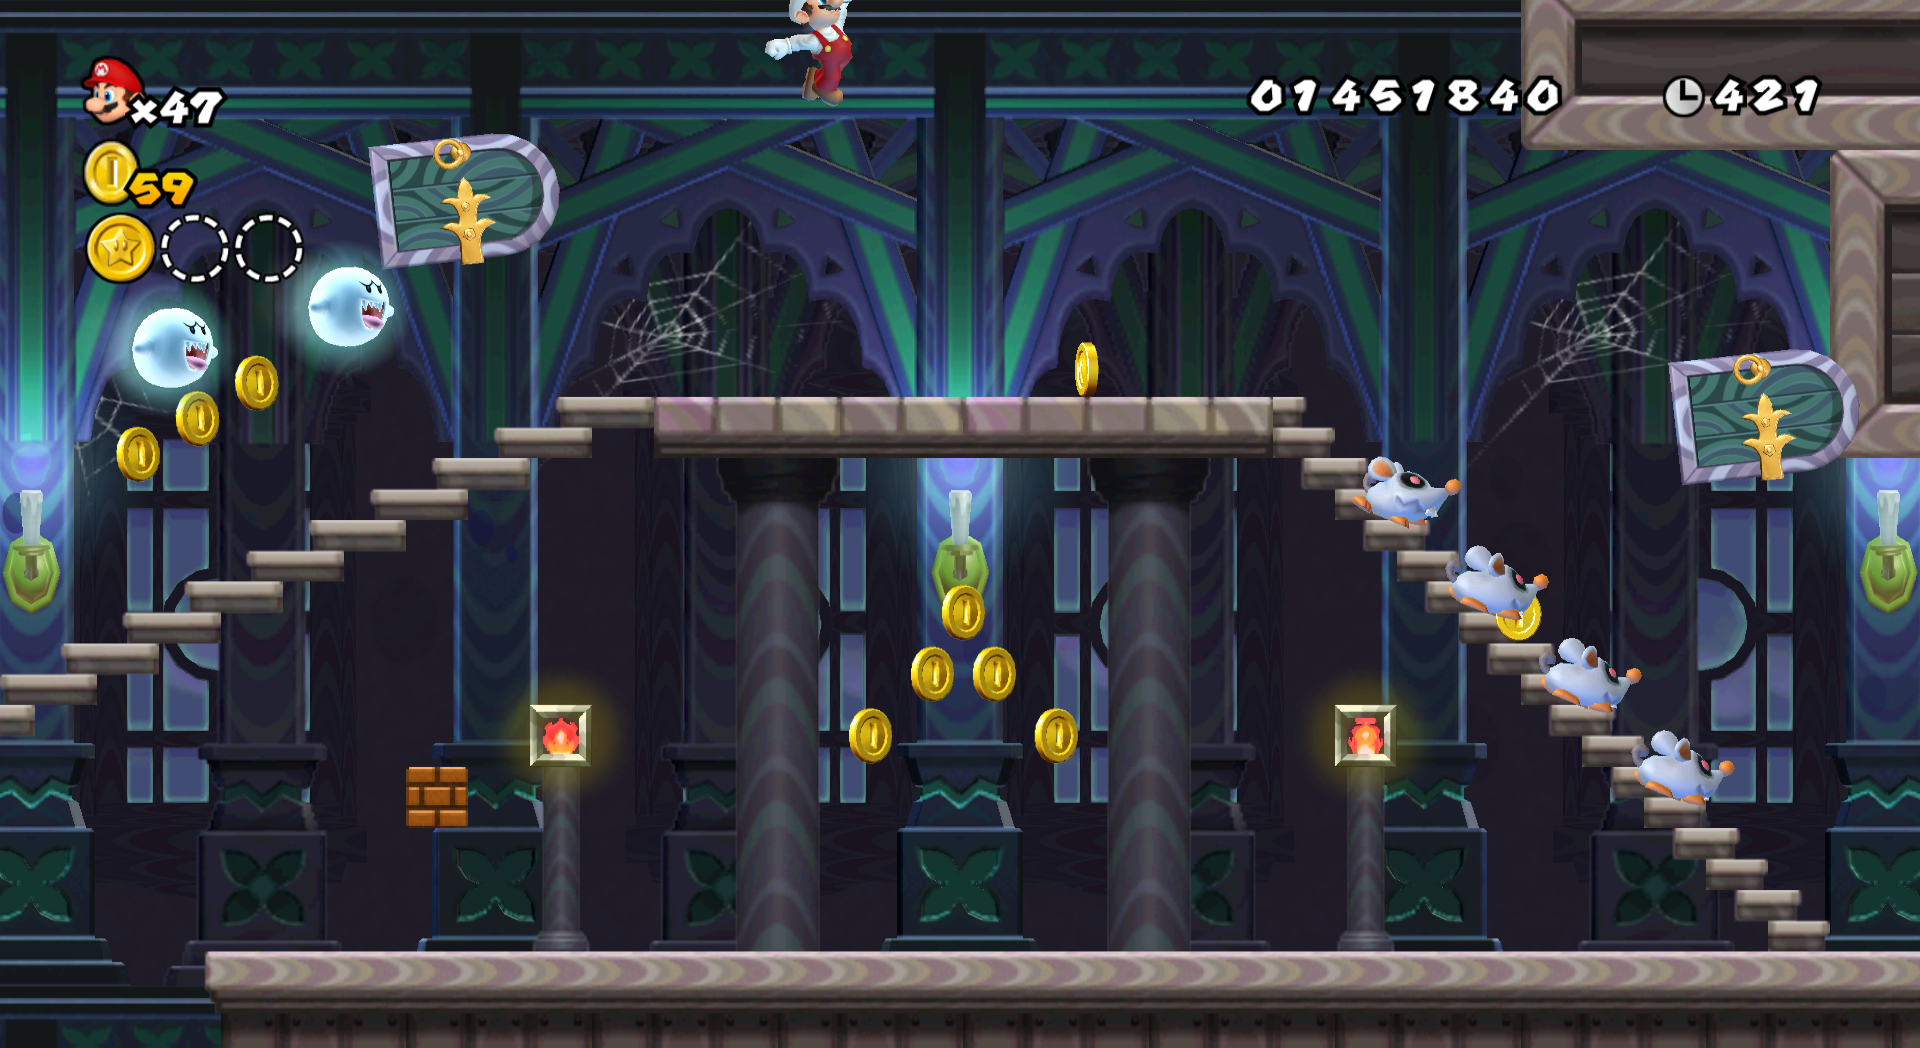 is there a secret passageway in super mario bros wii world 3 in the ghost house to get to world 6